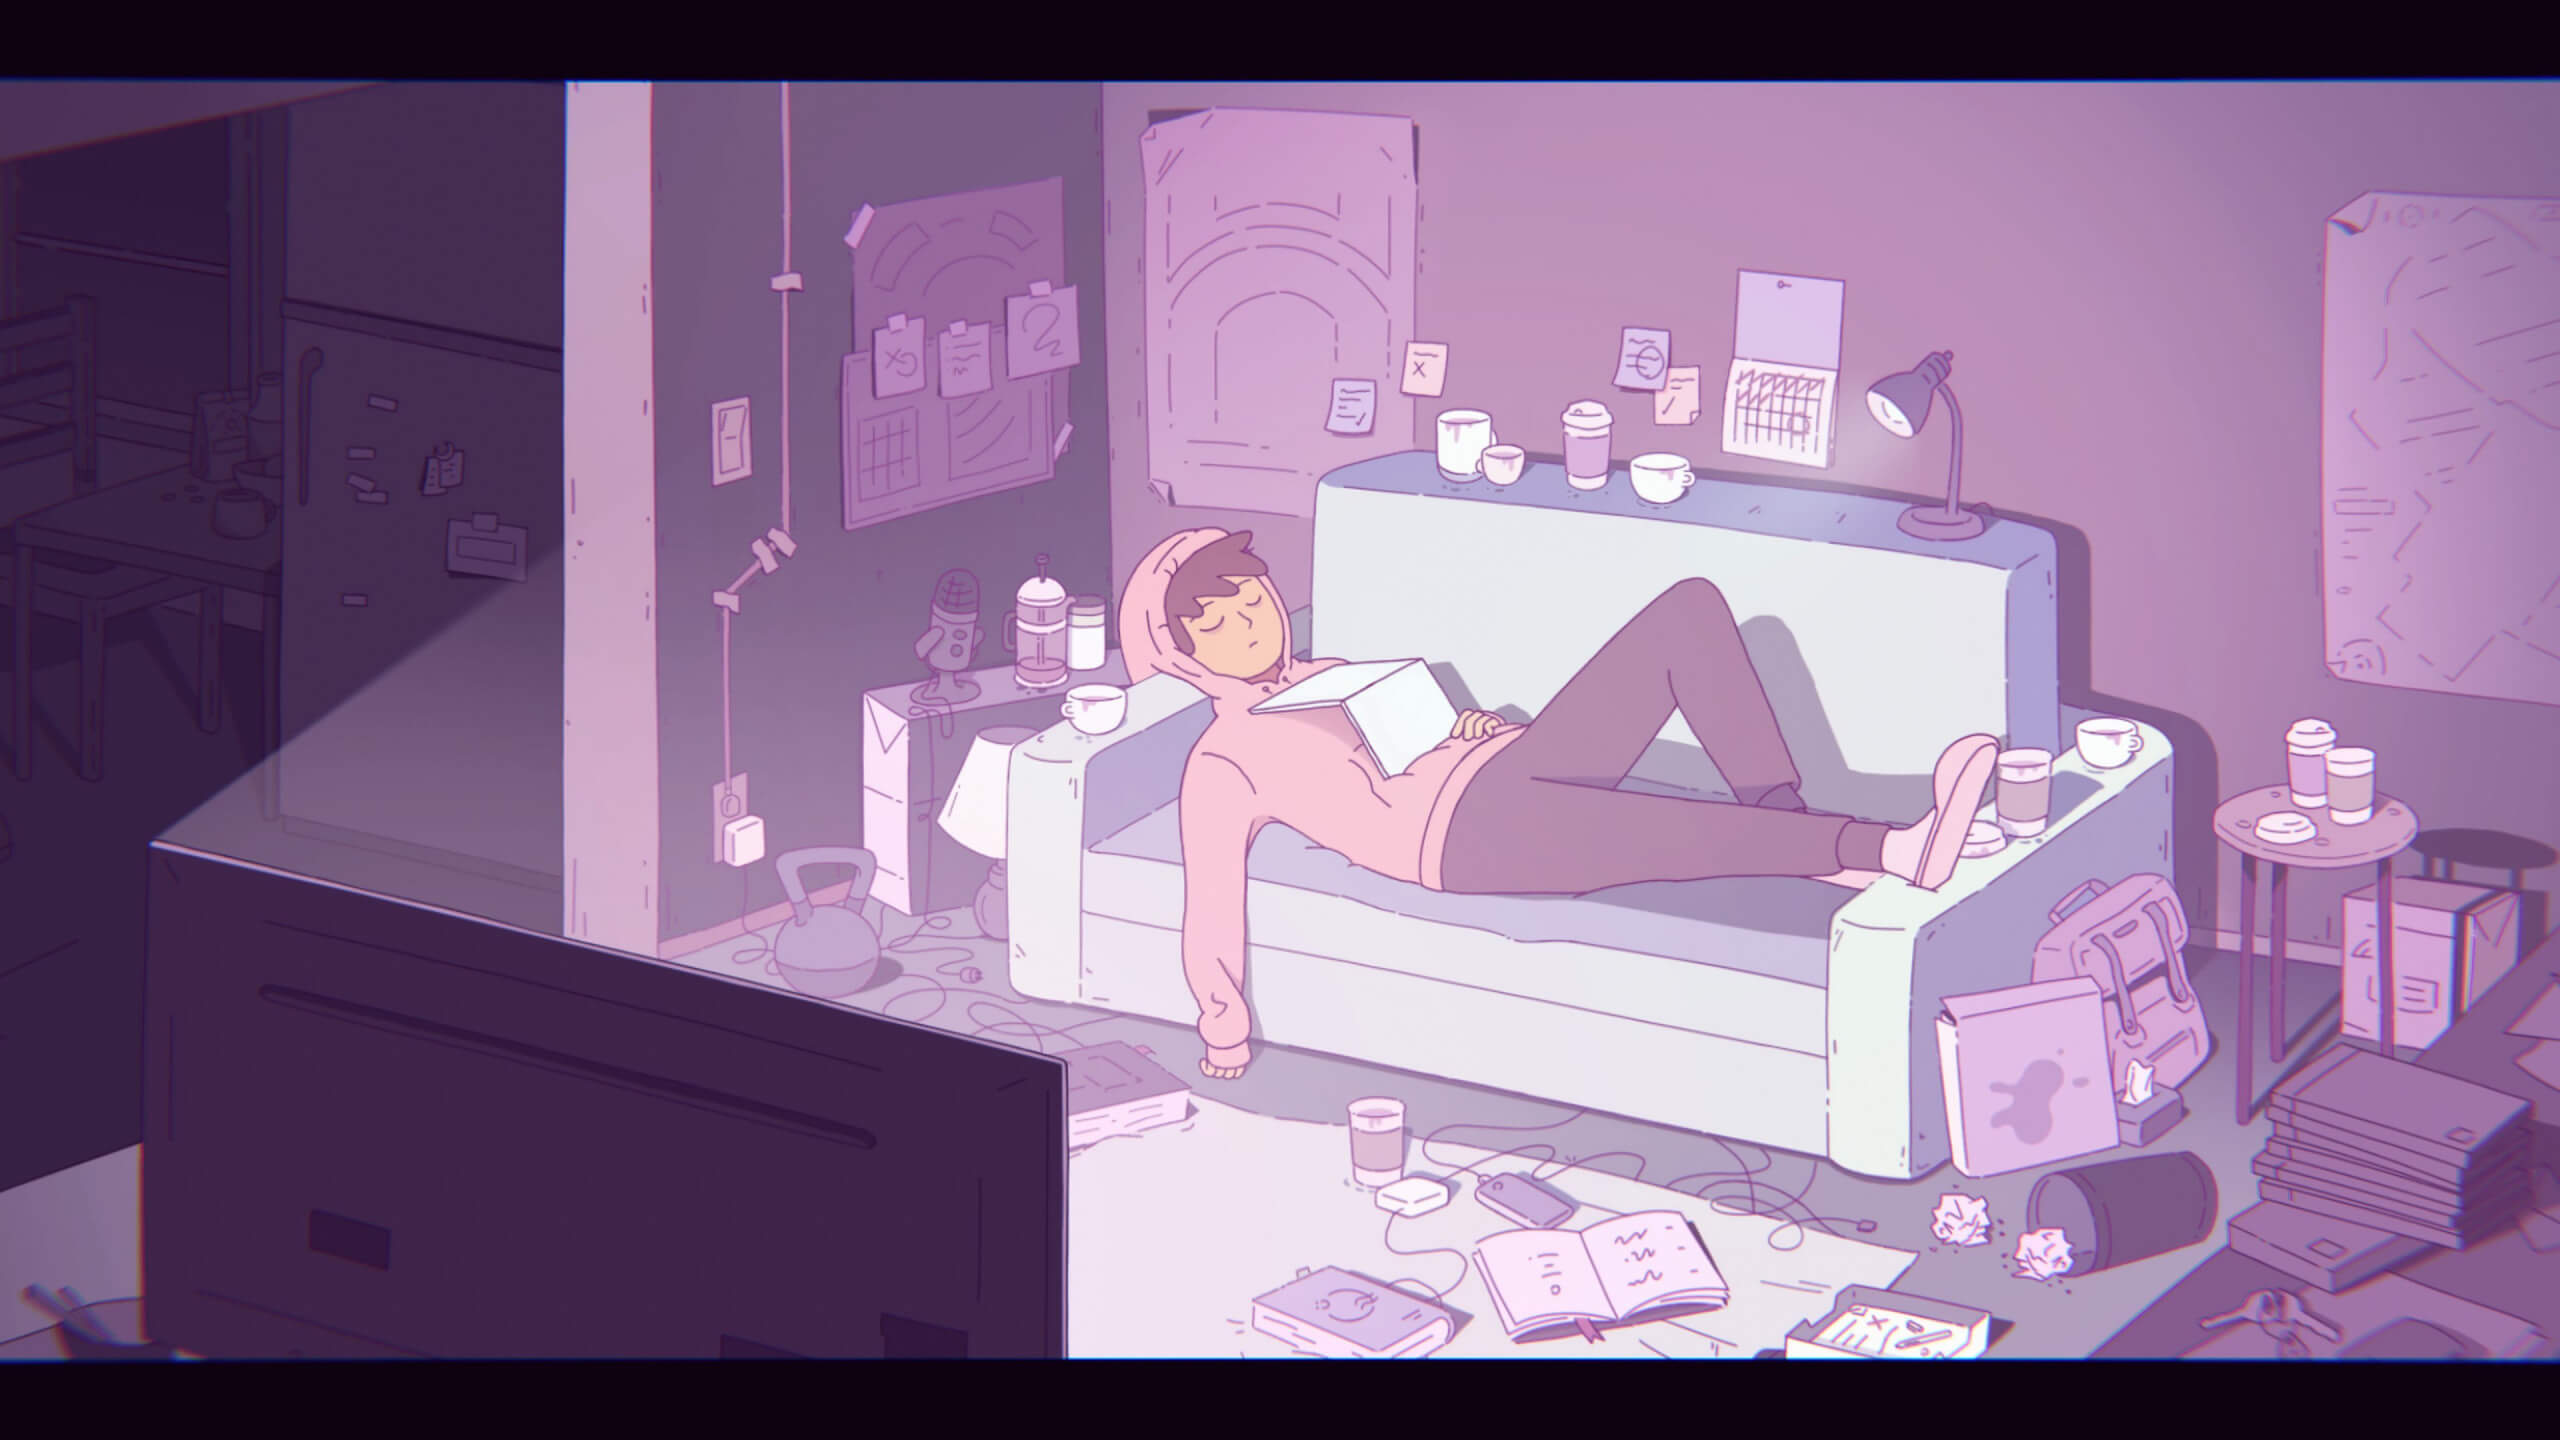 the main character lying asleep on their couch surrounded by lots of coffee